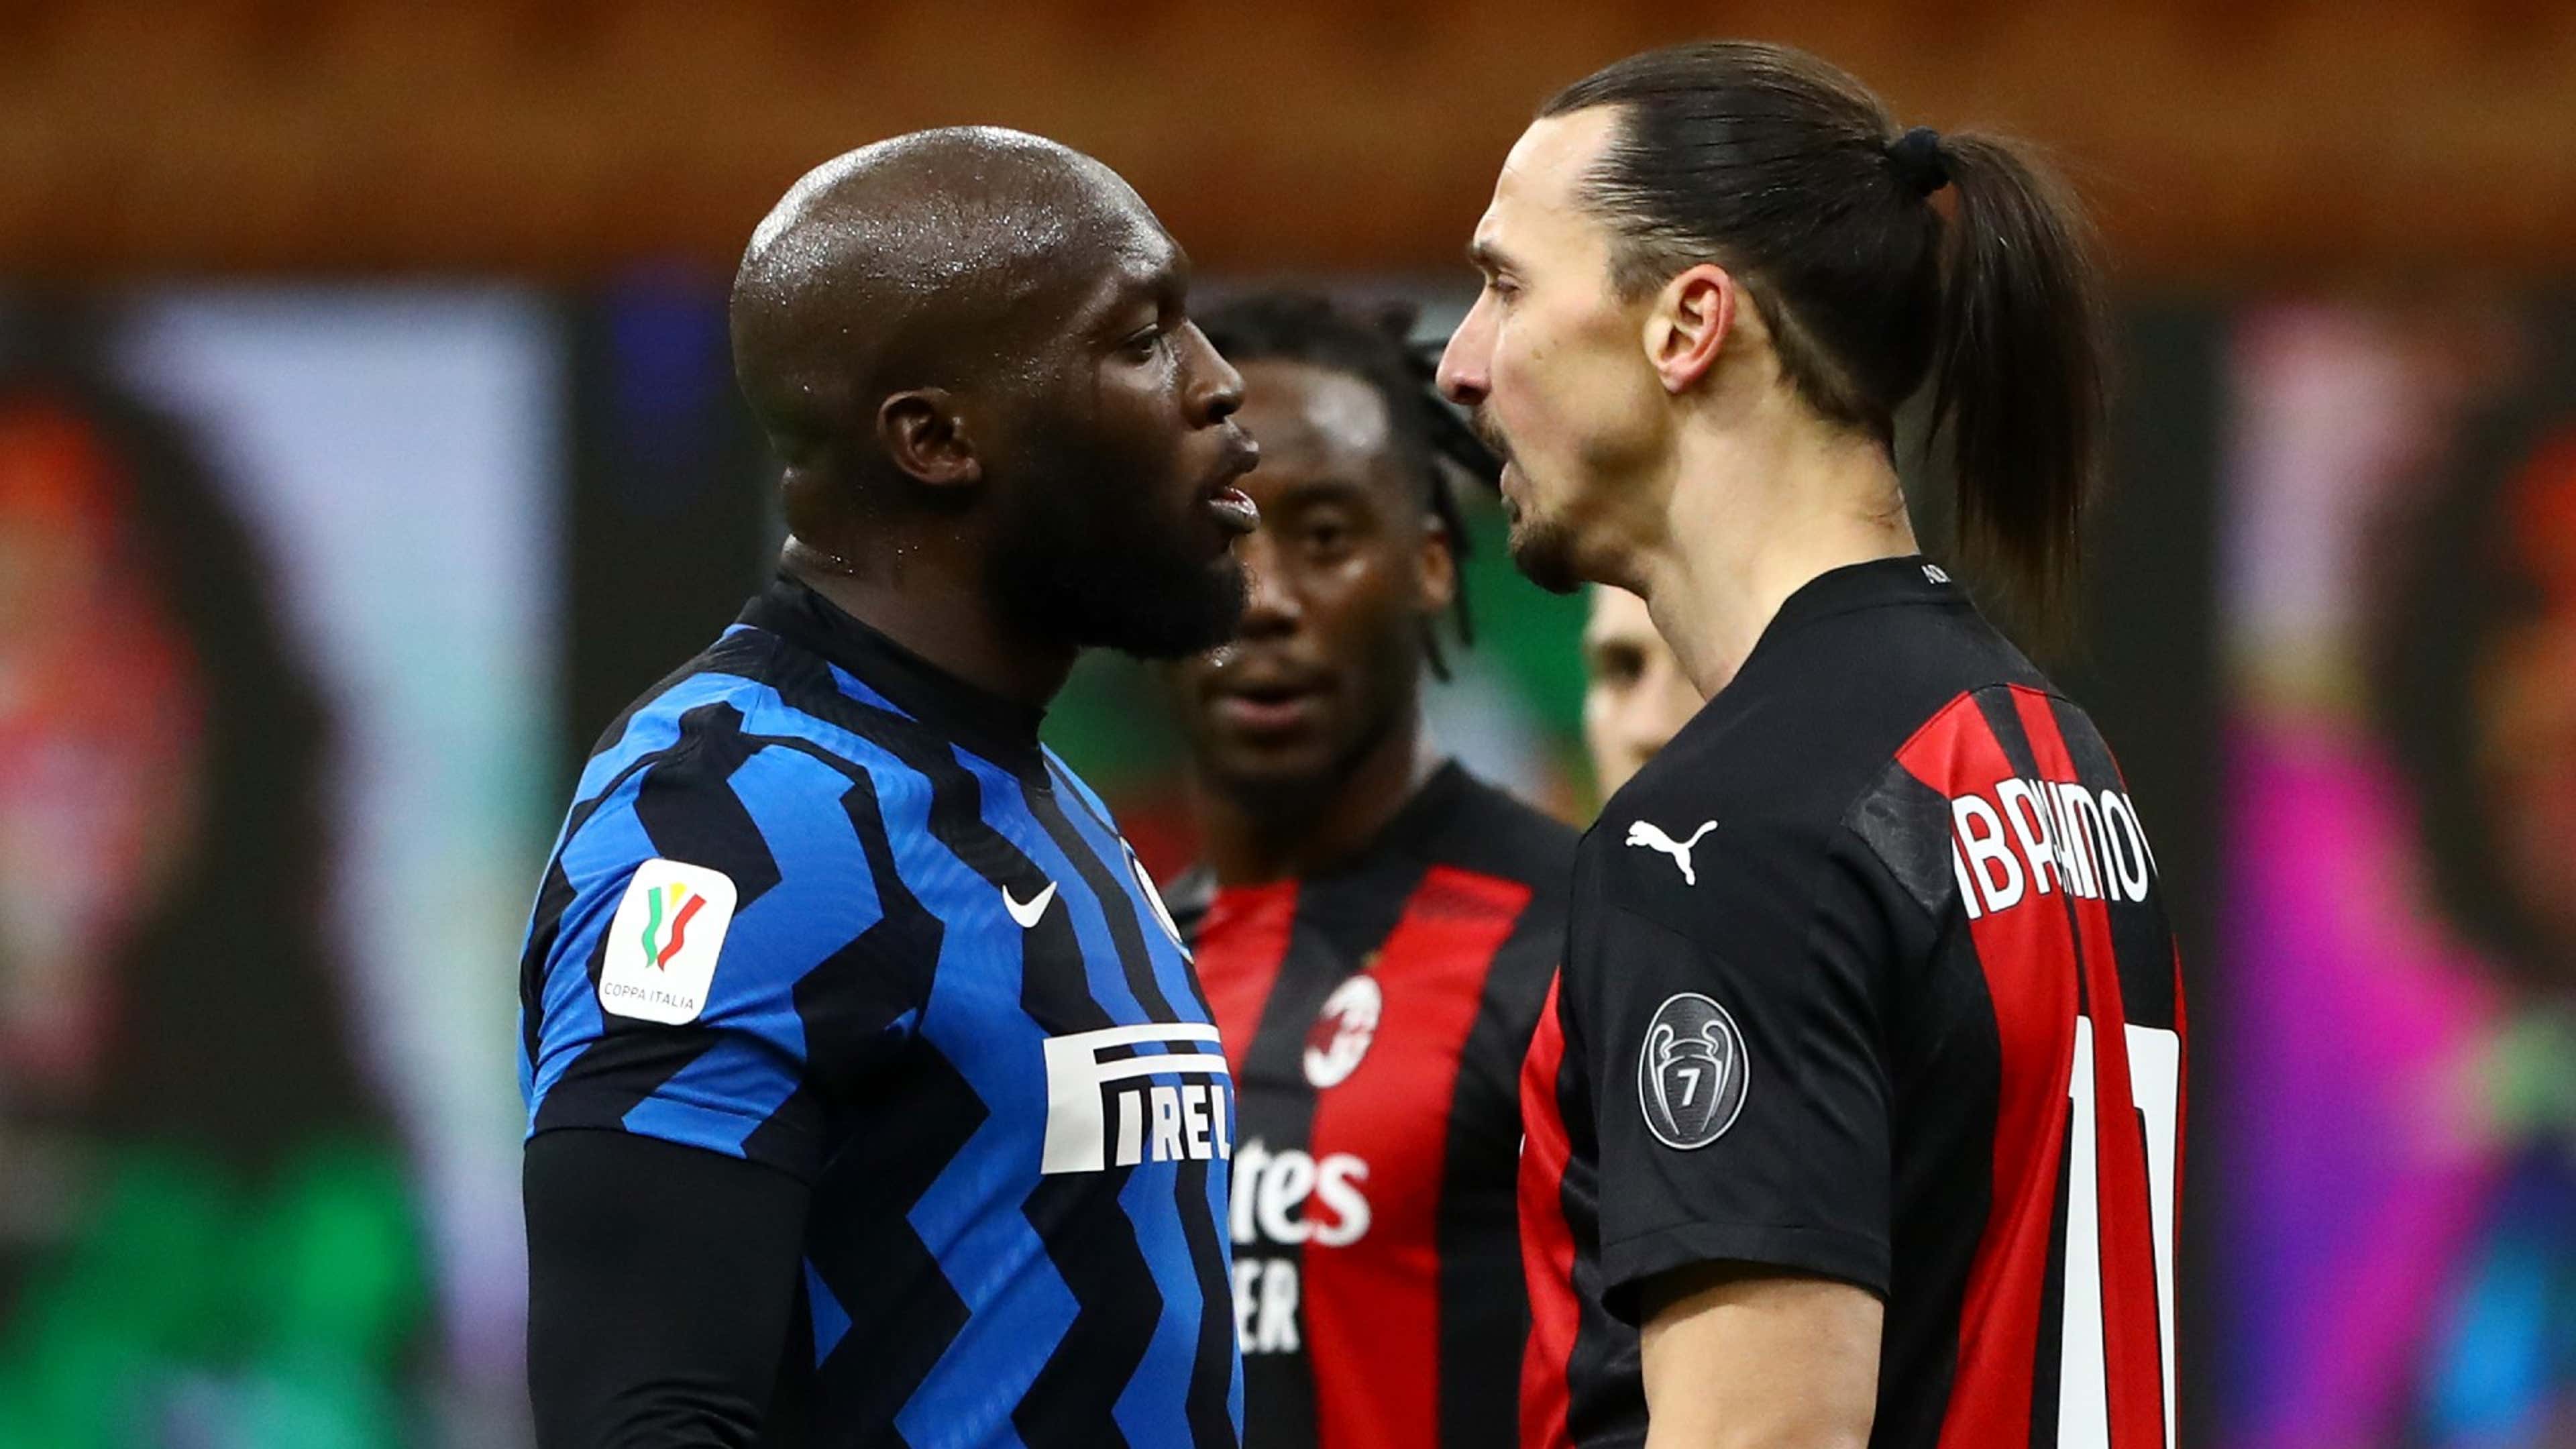 Lets Go Inside You Btch Ibrahimovic And Lukaku Square Off In Fiery Milan Derby